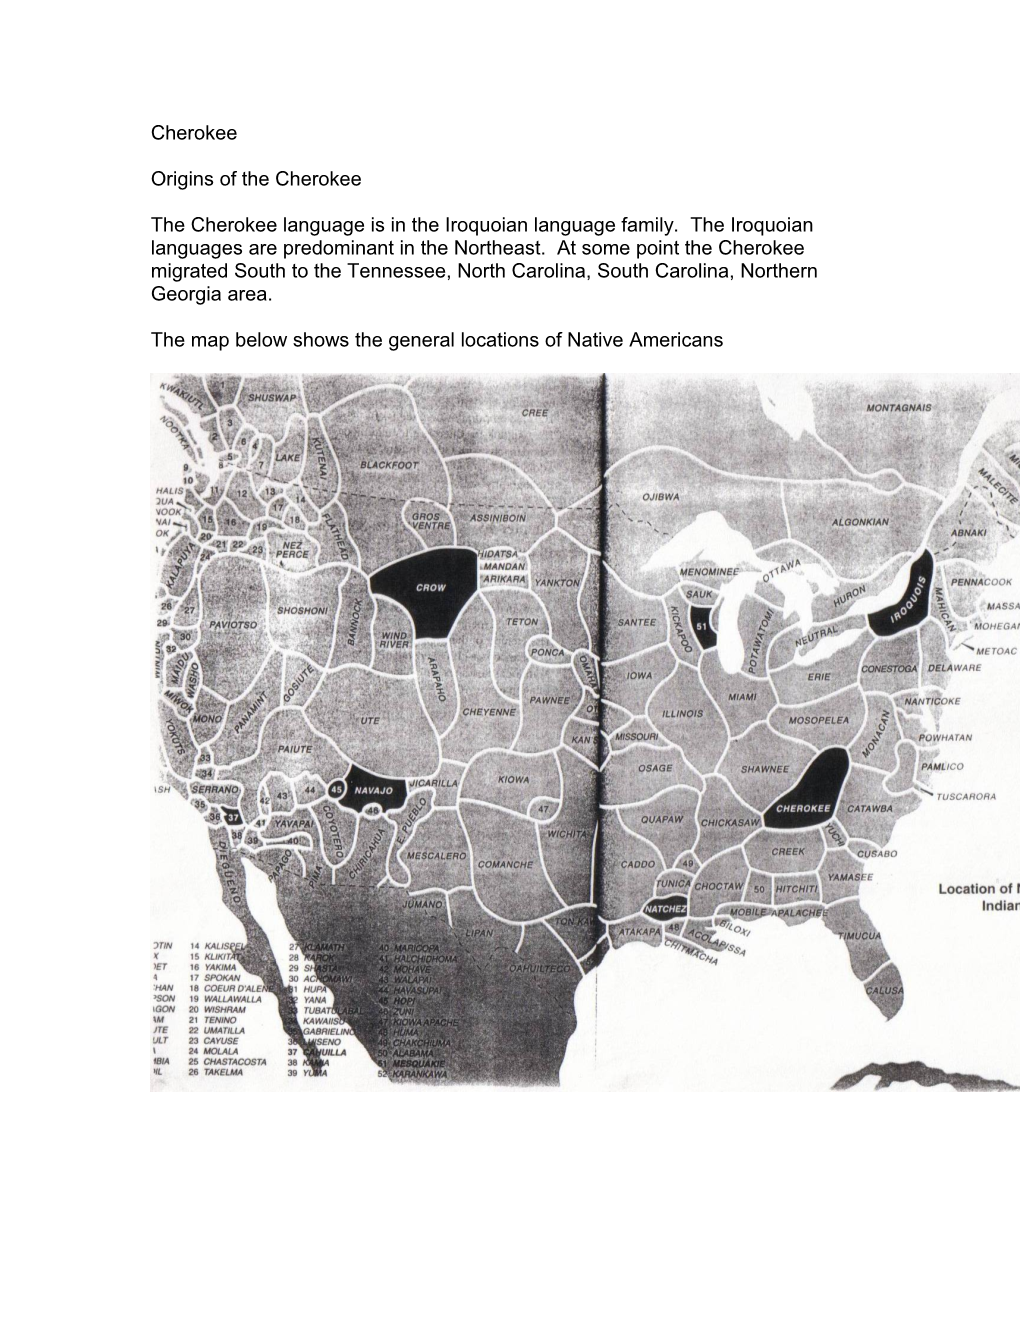 The Map Below Shows the General Locations of Native Americans